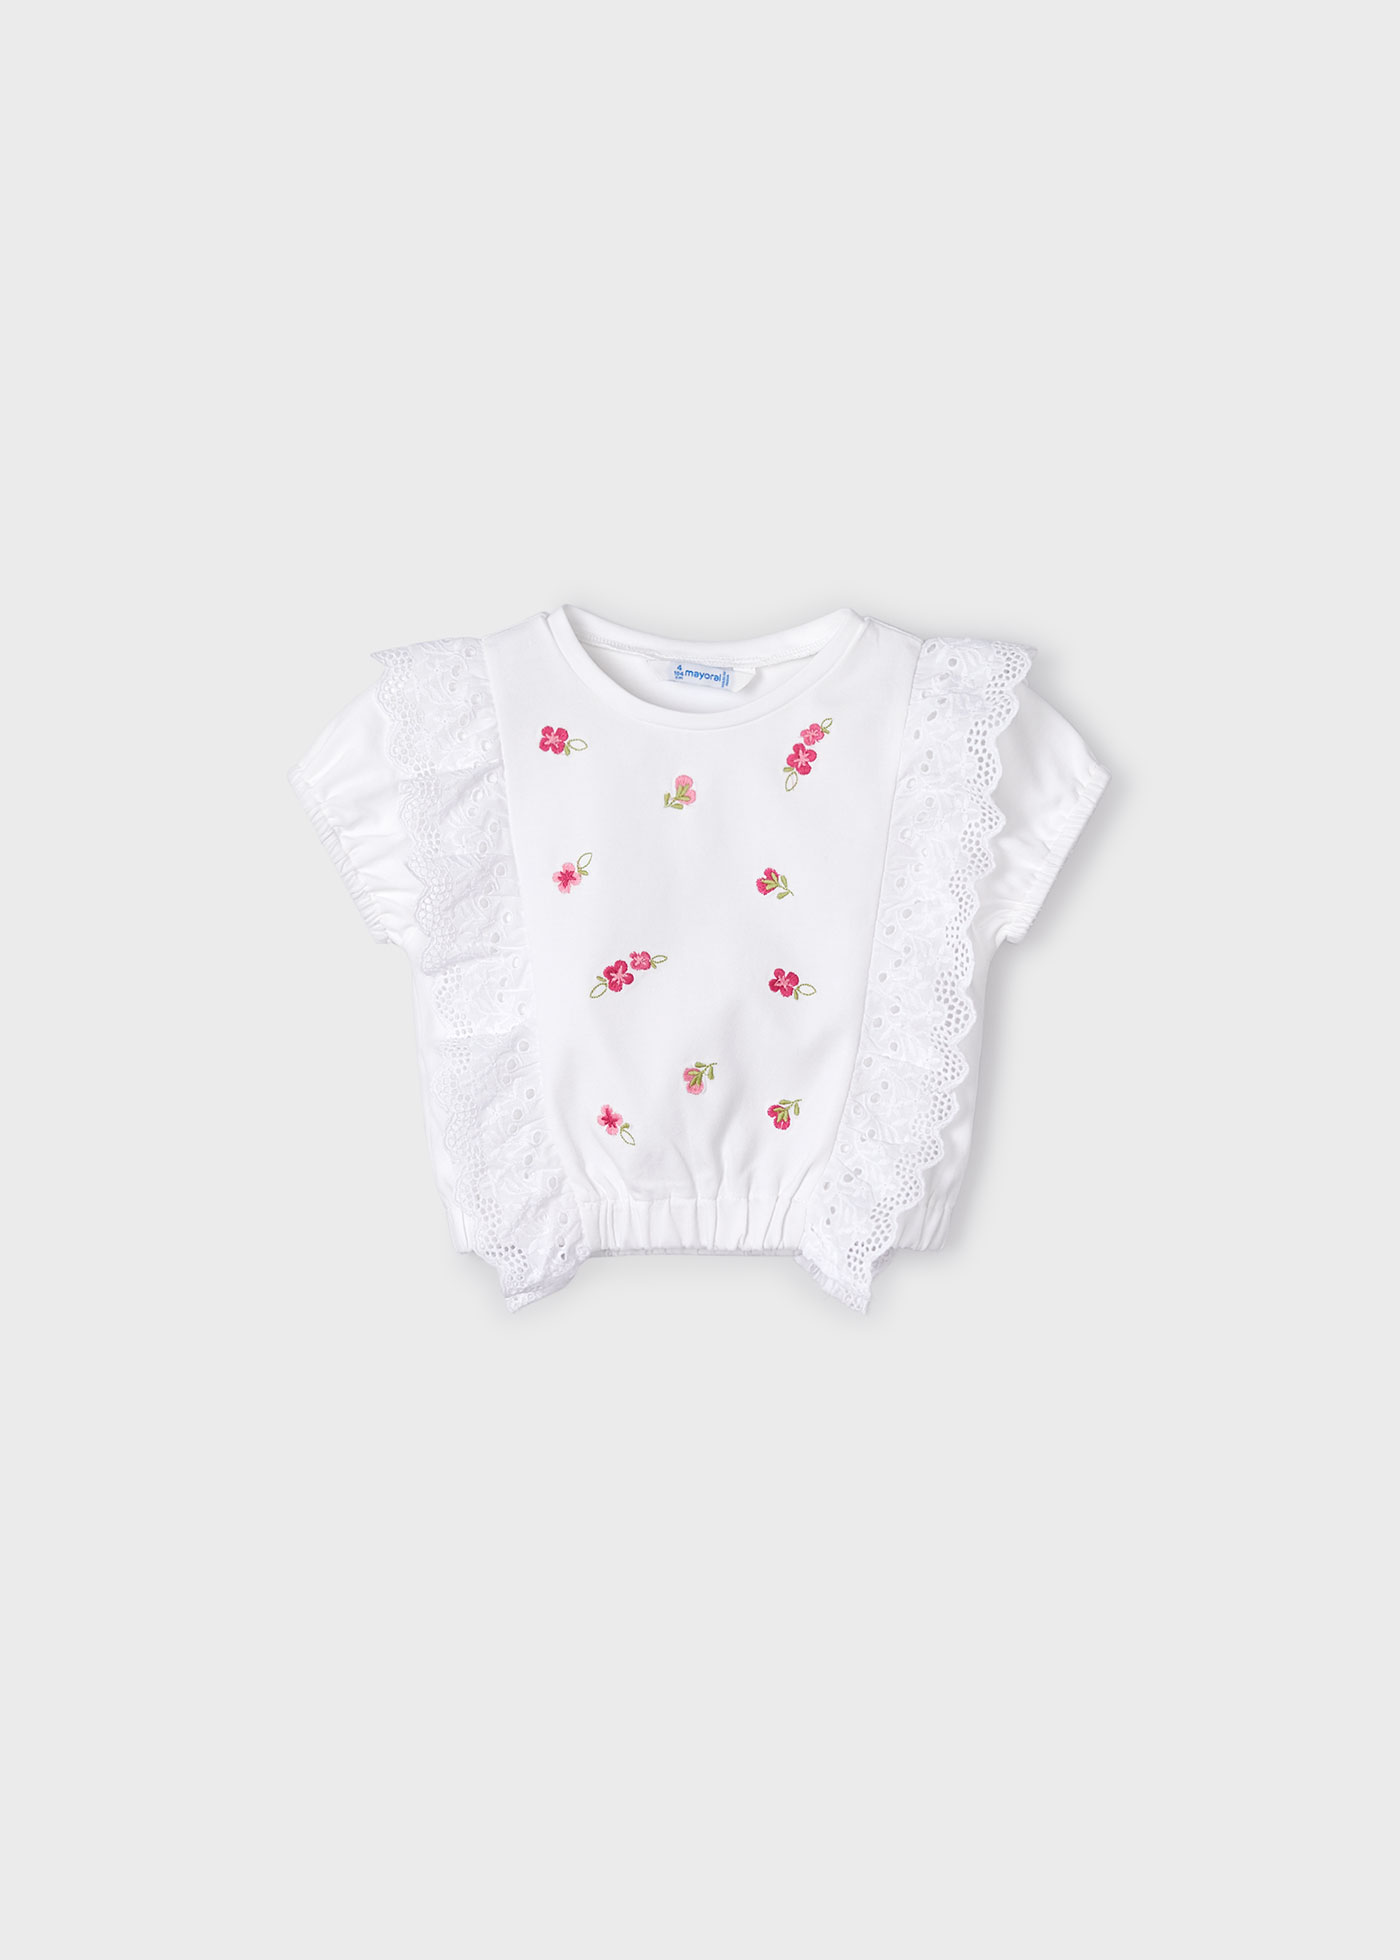 Girls embroidered ruffled t-shirt | Mayoral